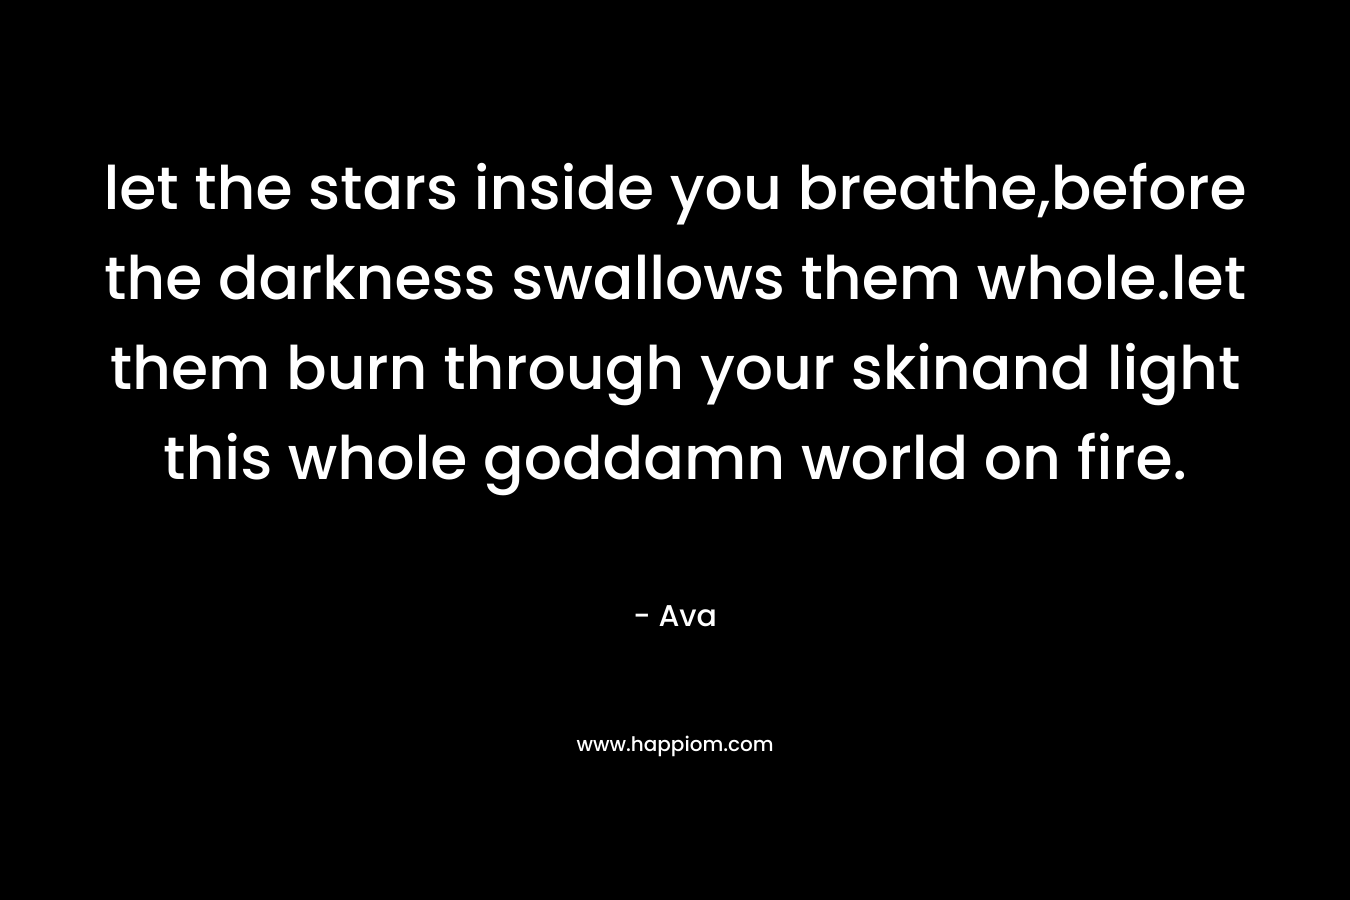 let the stars inside you breathe,before the darkness swallows them whole.let them burn through your skinand light this whole goddamn world on fire. – Ava